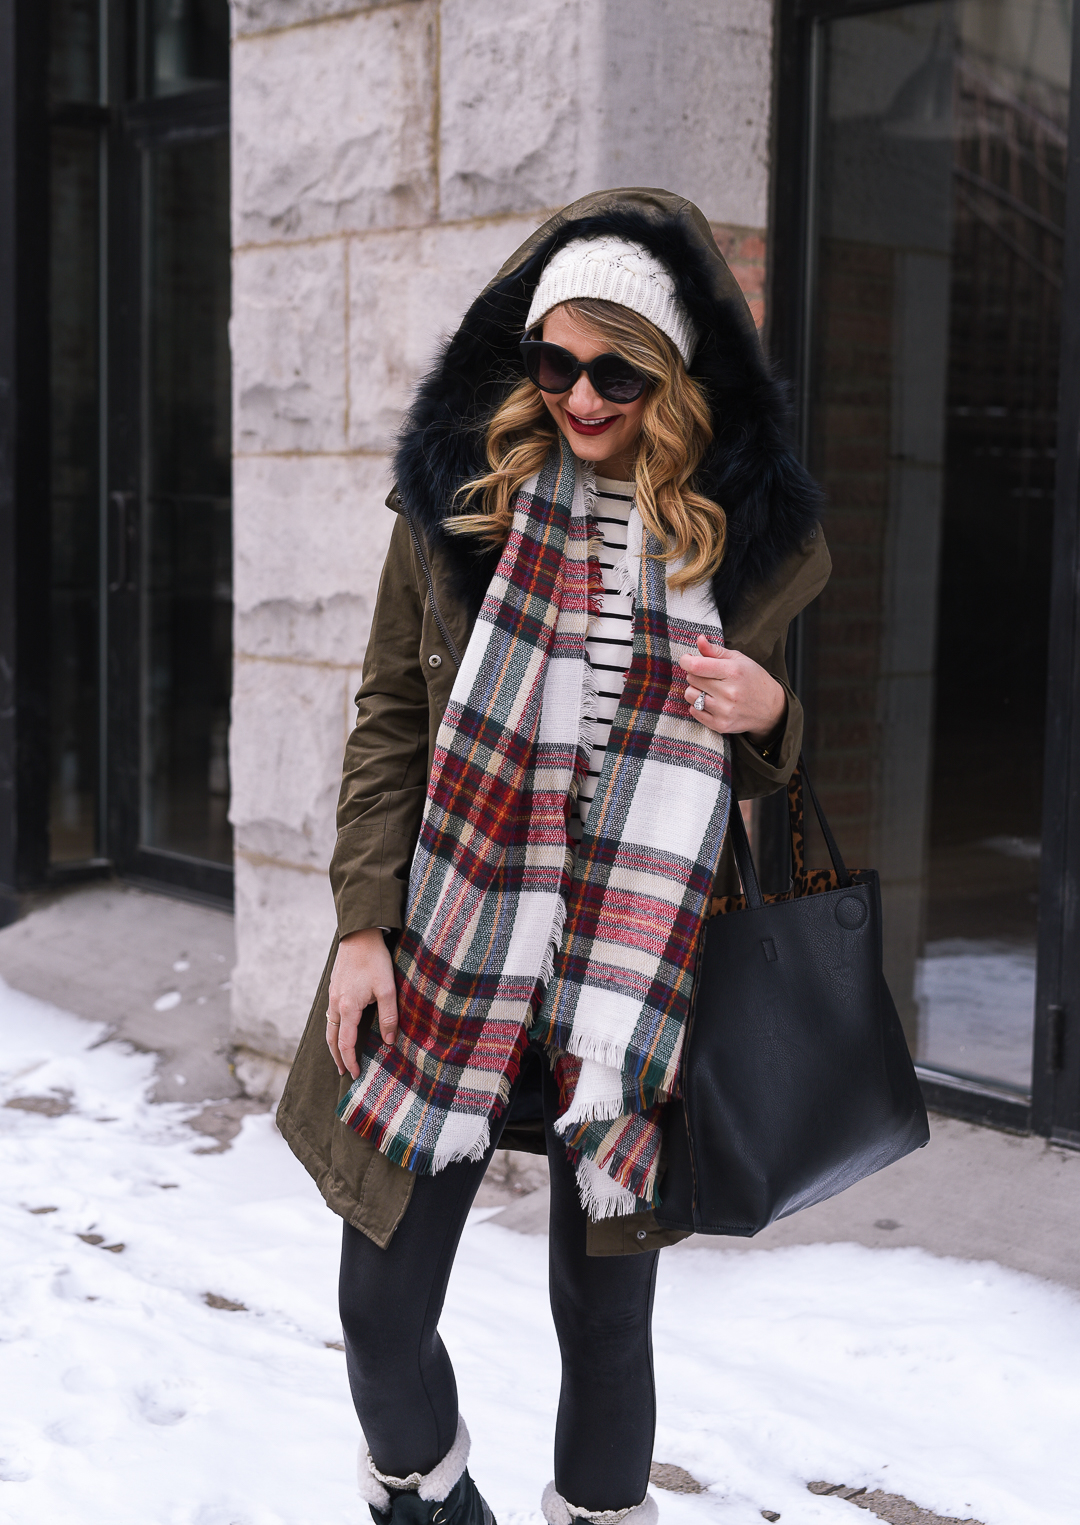 how to wear plaid and stripes - how to wear an olive dawn levy coat by popular Chicago fashion blogger Visions of Vogue